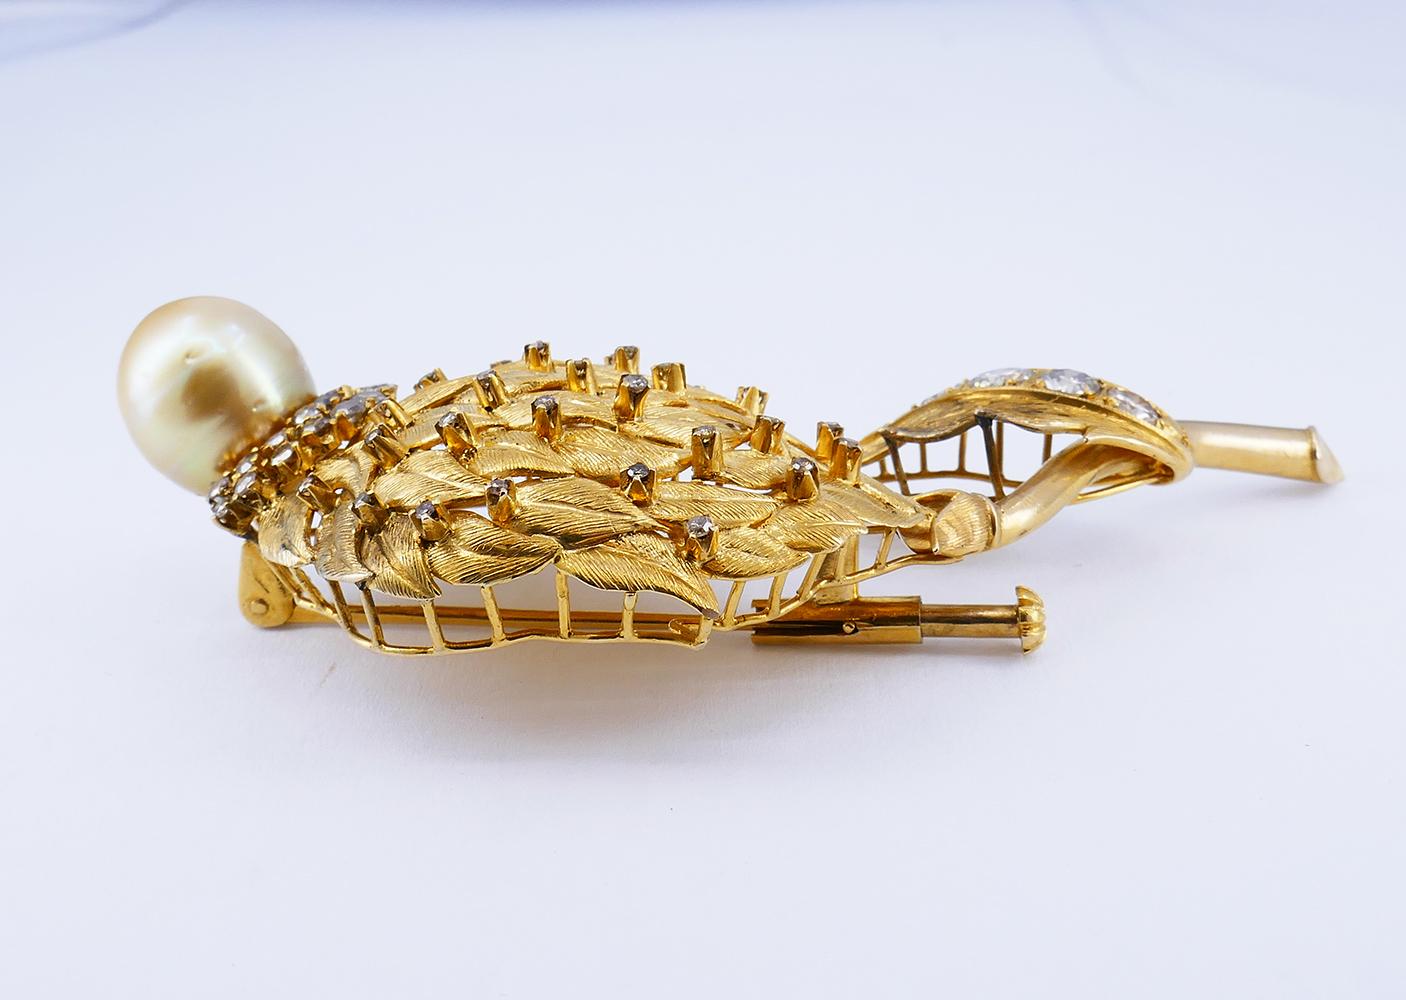 	A spectacular vintage brooch pin made of 14 karat gold, featuring a pearl and diamonds.
	Being a unique estate jewelry piece, this vintage gold pin is designed as an artichoke thistle flower. The “petals” were meticulously crafted by using